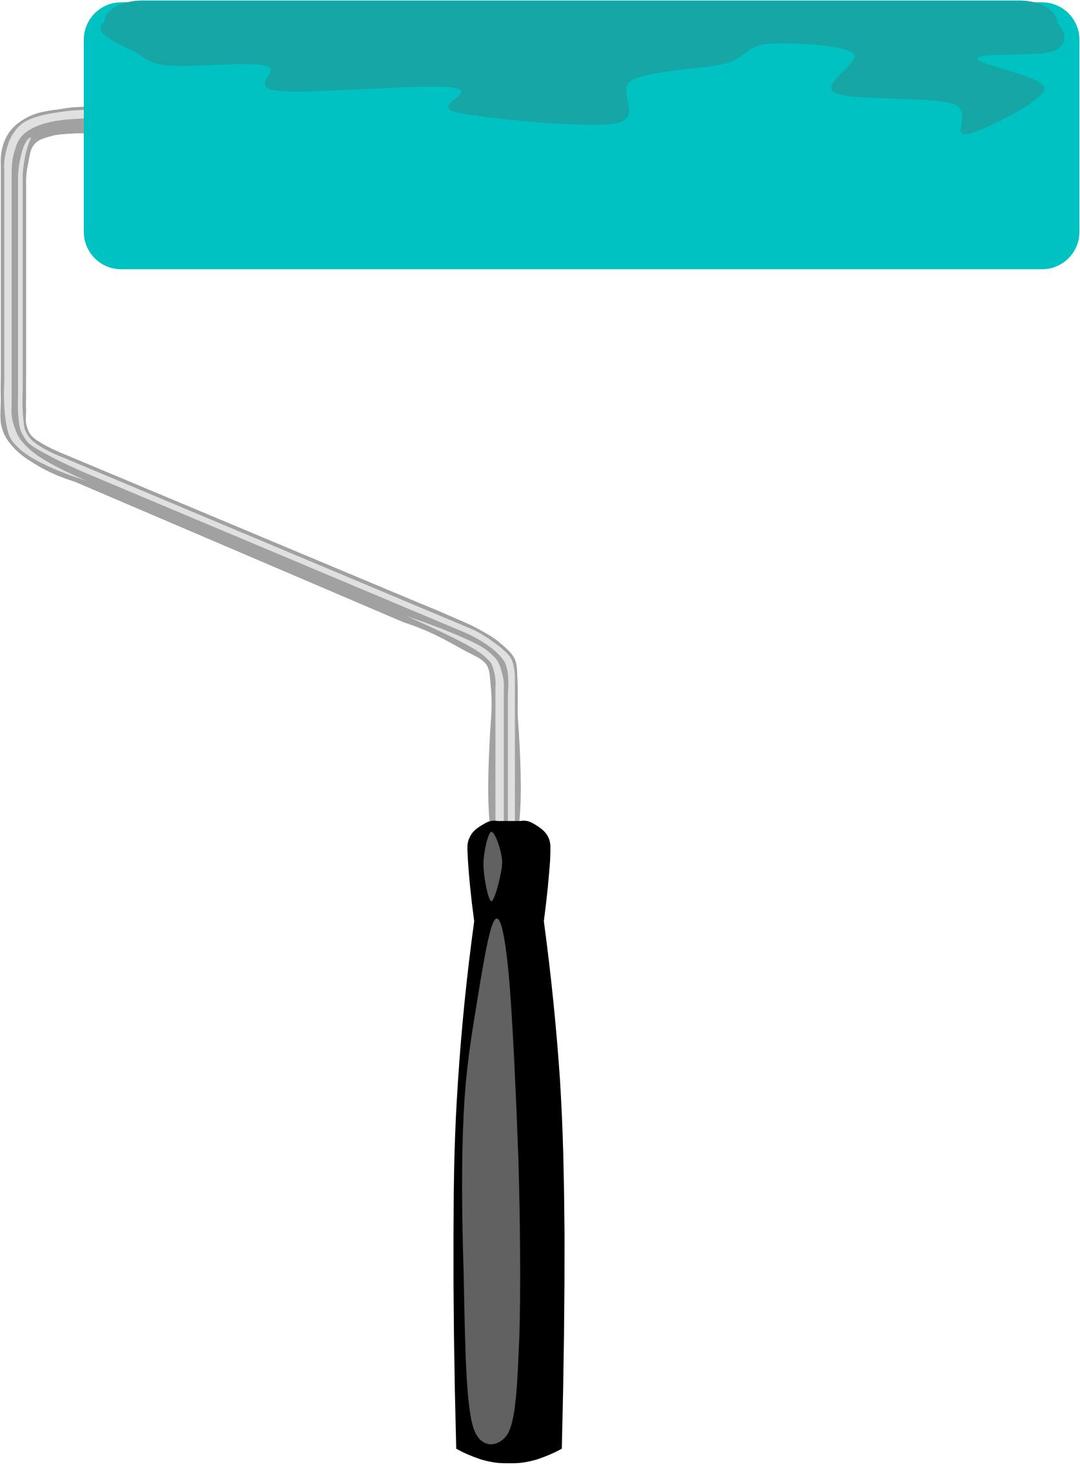 Paint roller, border, and banner png transparent